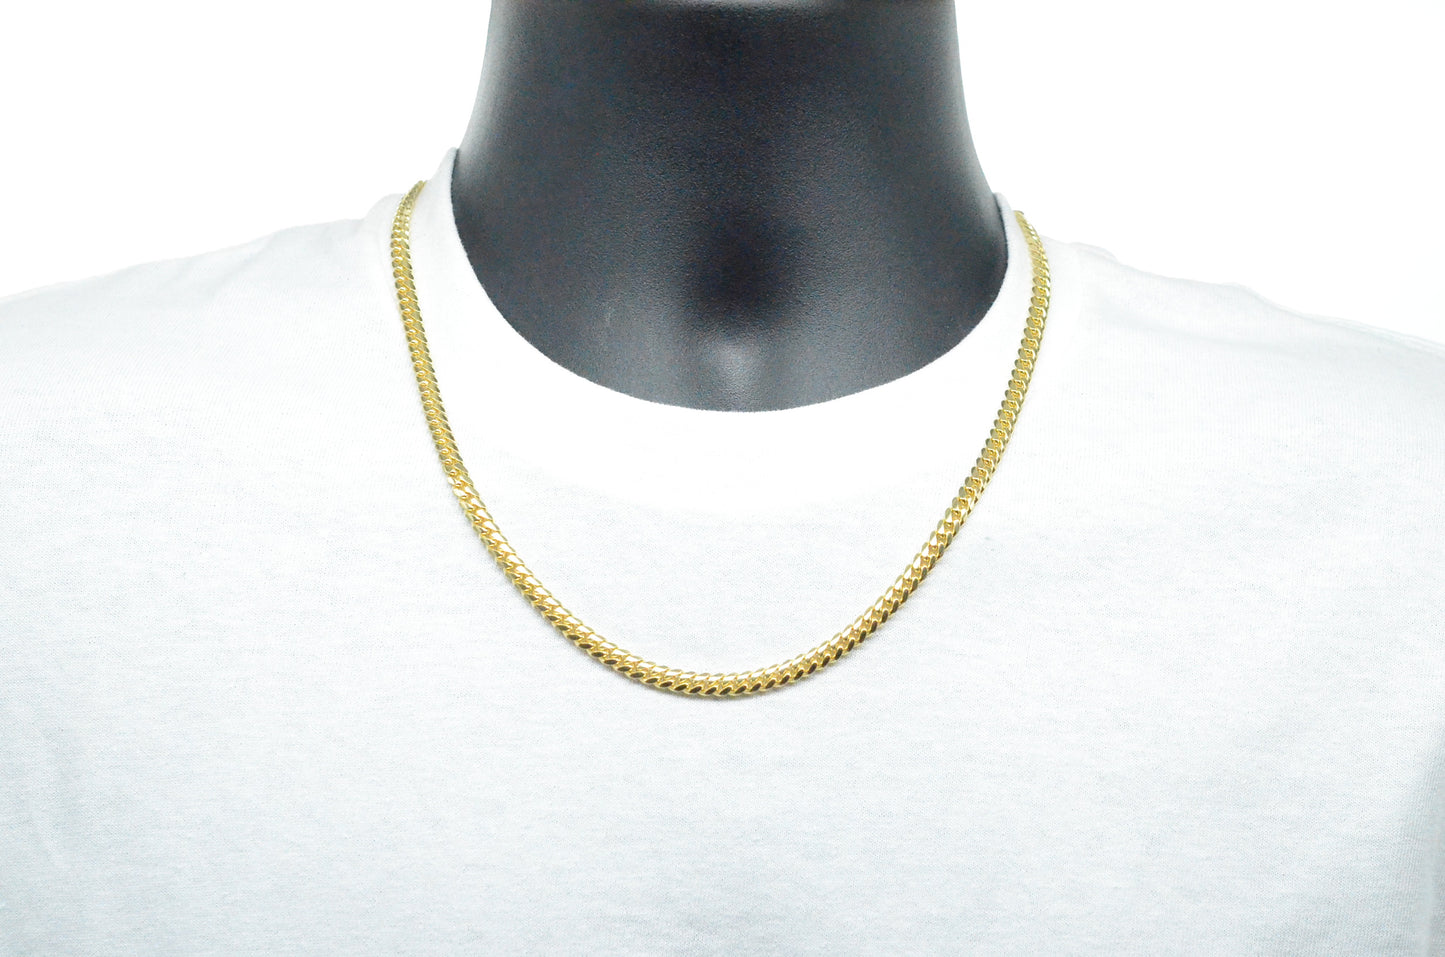 5mm Solid Gold Miami Cuban Chains Solid Gold Cuban Chains